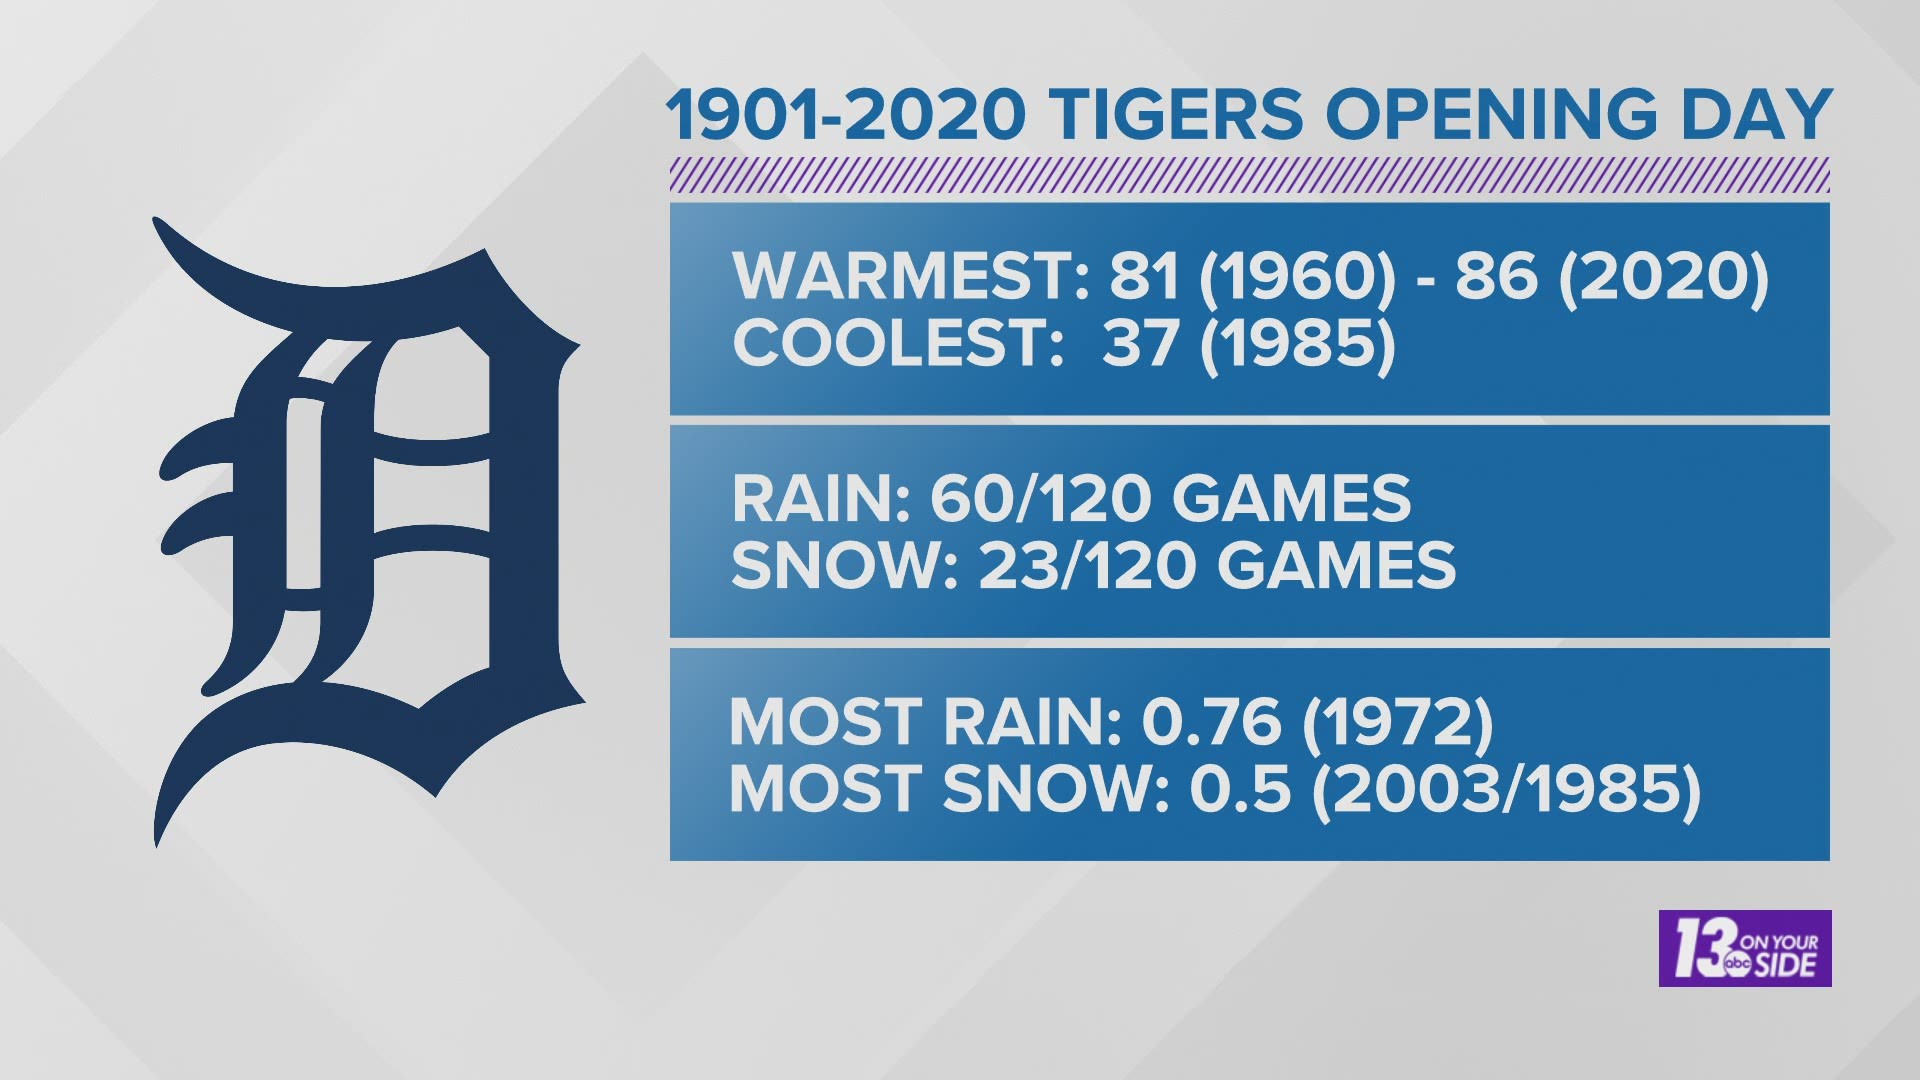 In the past 120 years of Tigers Baseball in Detroit, the weather can vary quite a bit! Meteorologist Michael Behrens shows us by just how much.